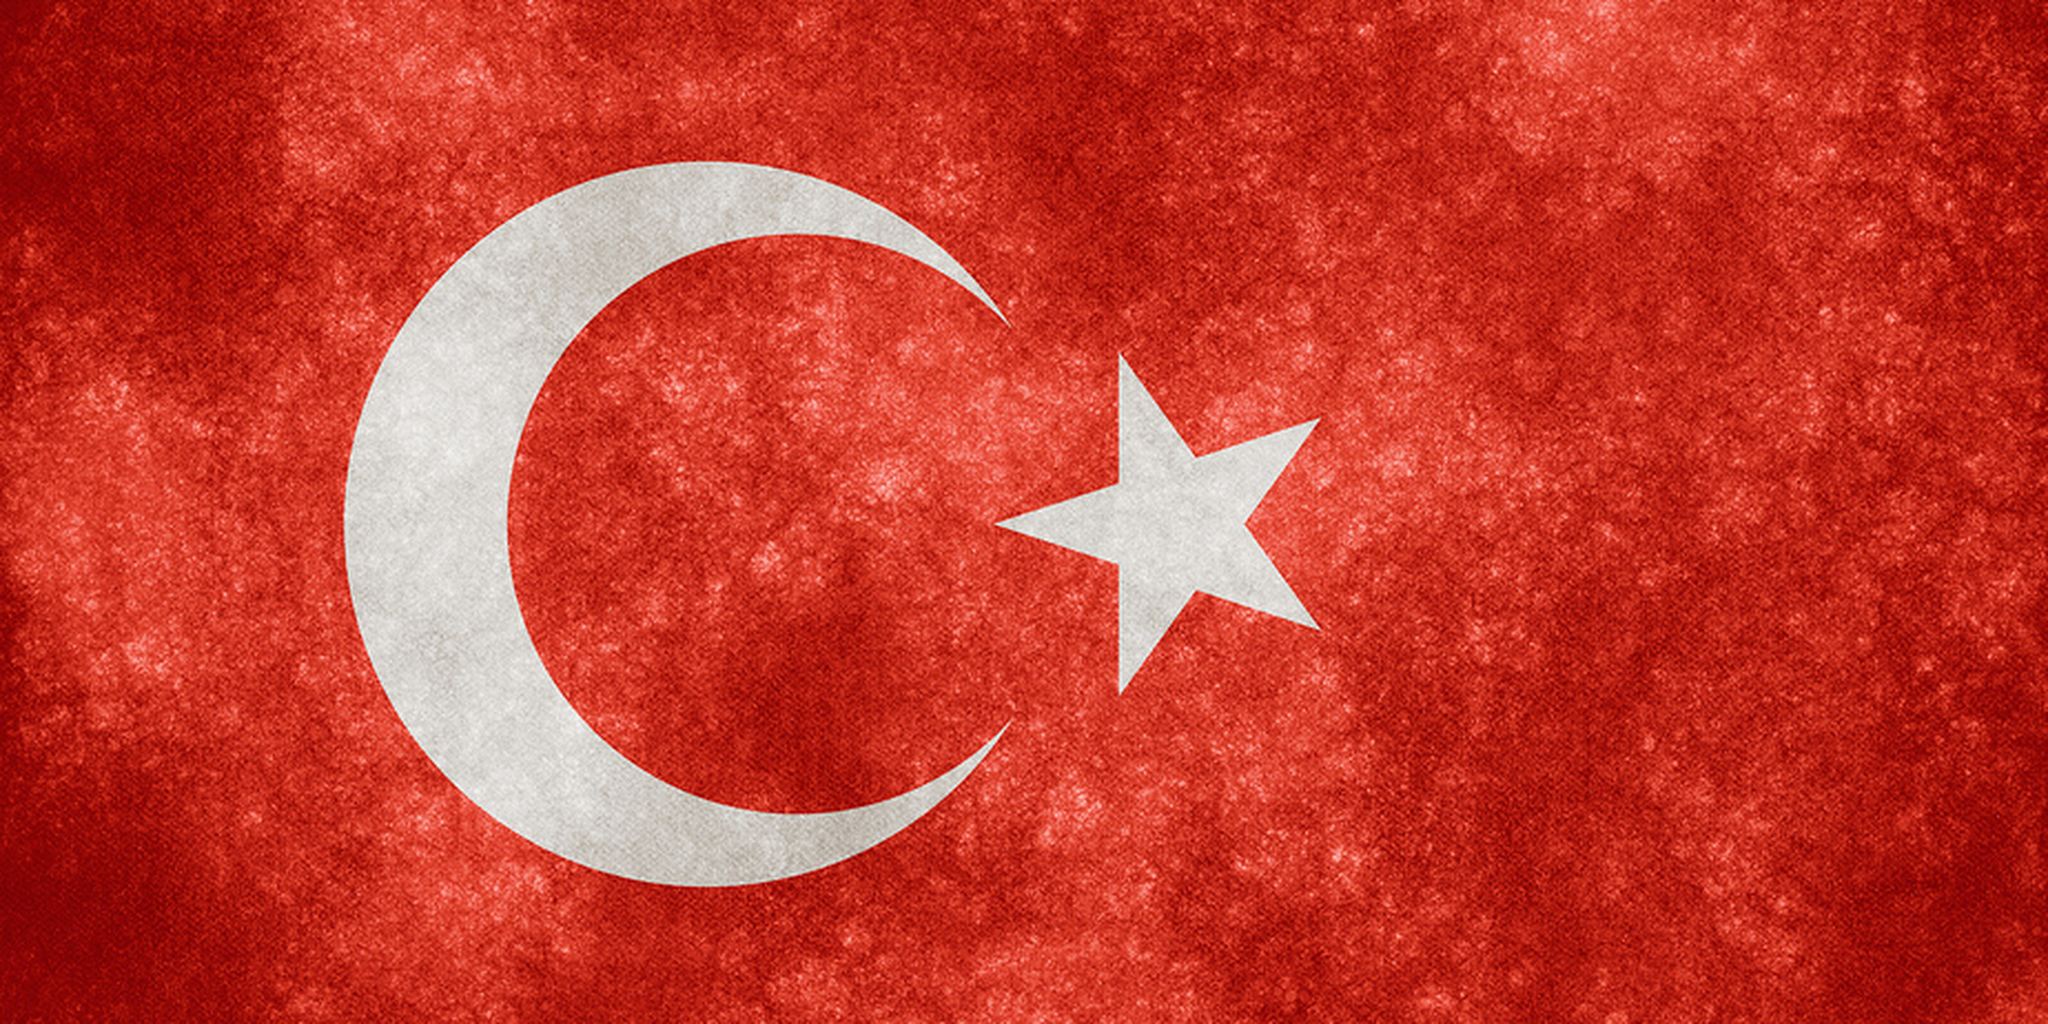 Here's how you can help Turks get around government censorship